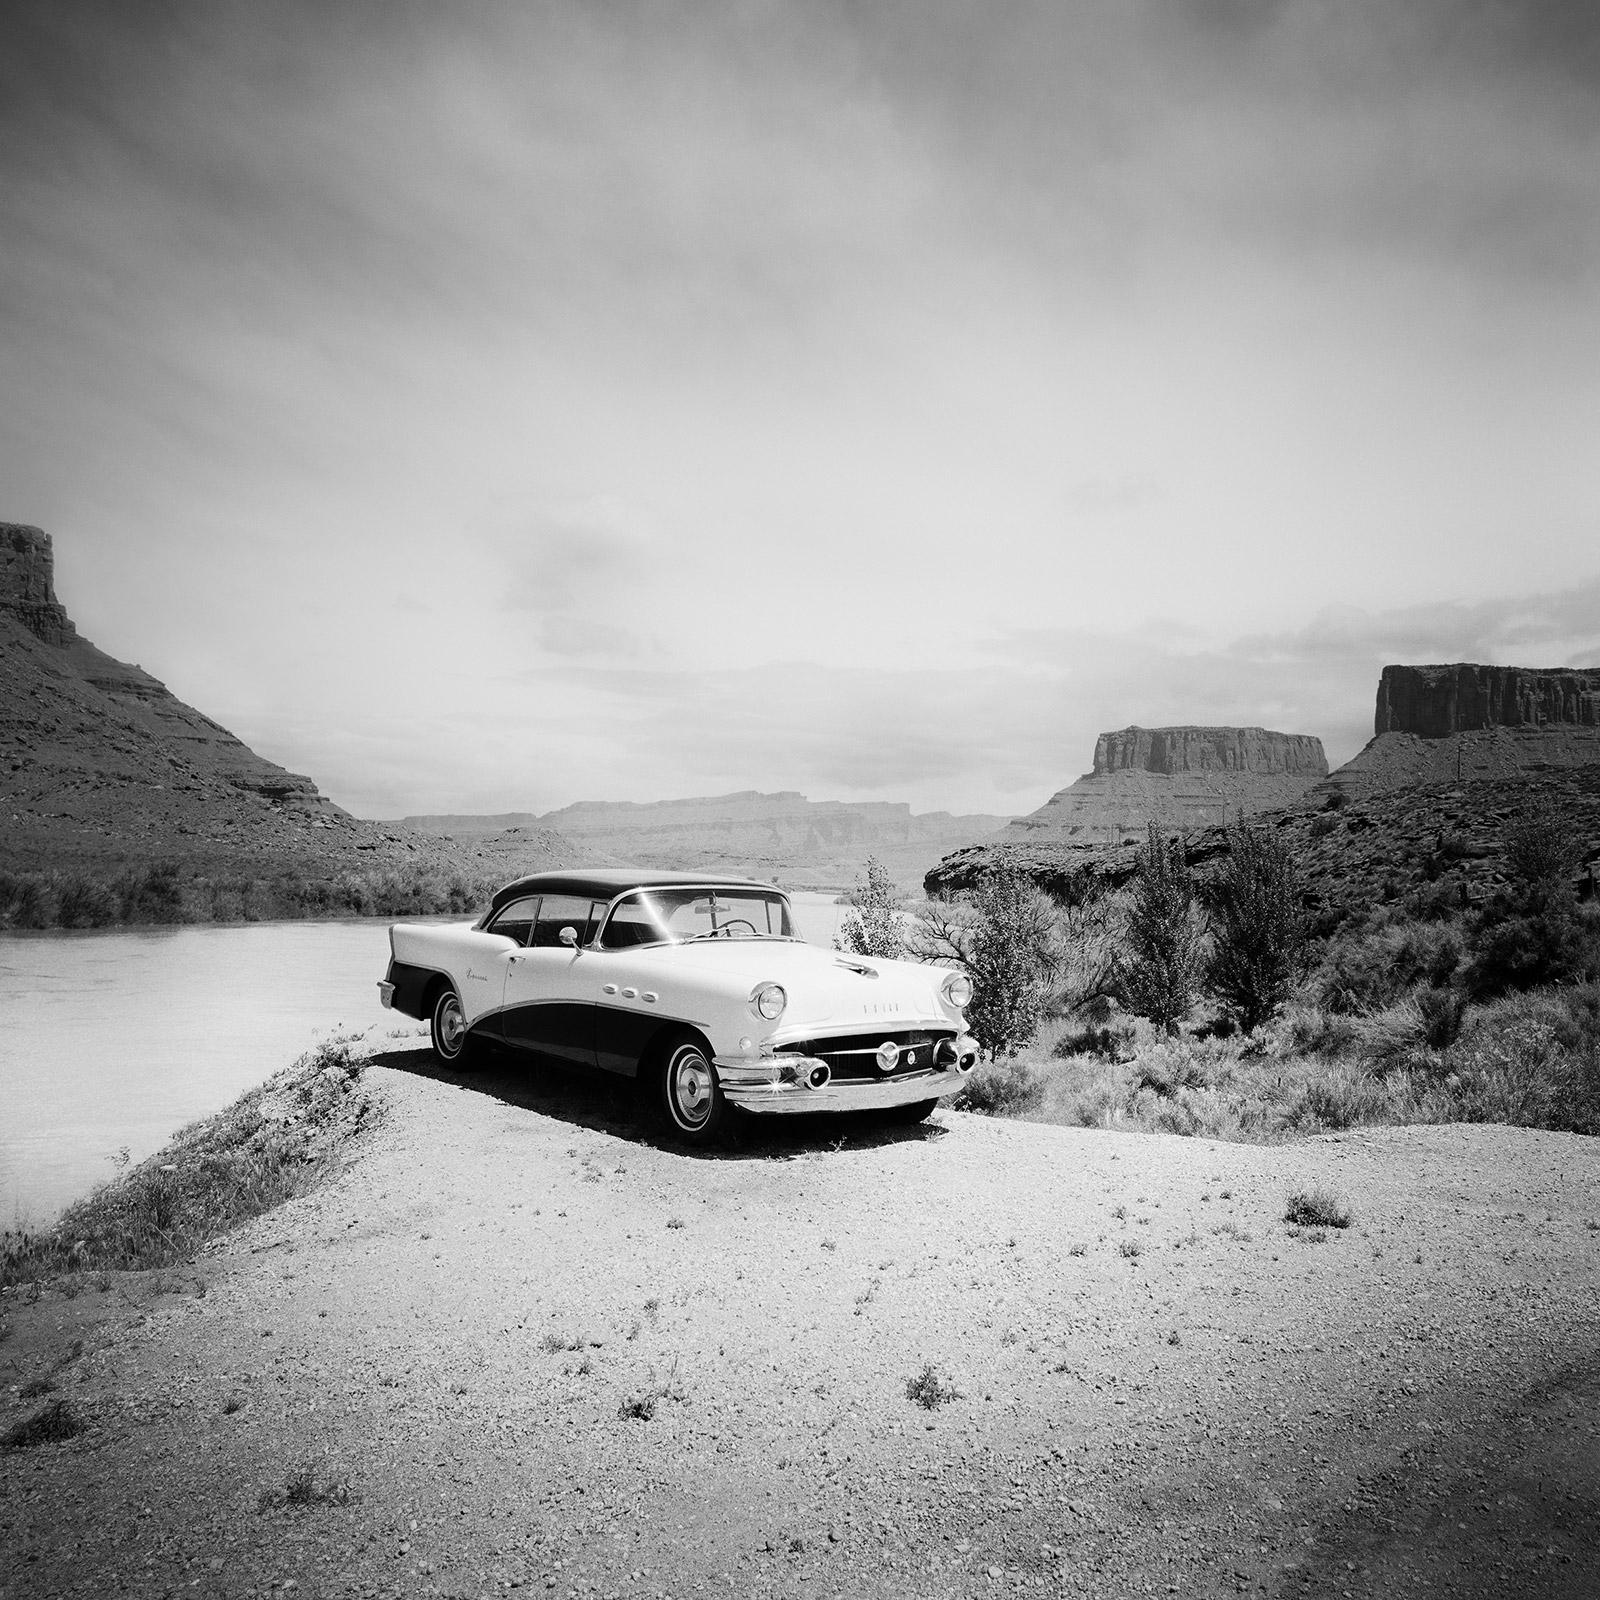 Gerald Berghammer Black and White Photograph - Buick 60 Century Convertible, Desert, USA, black and white landscape photography